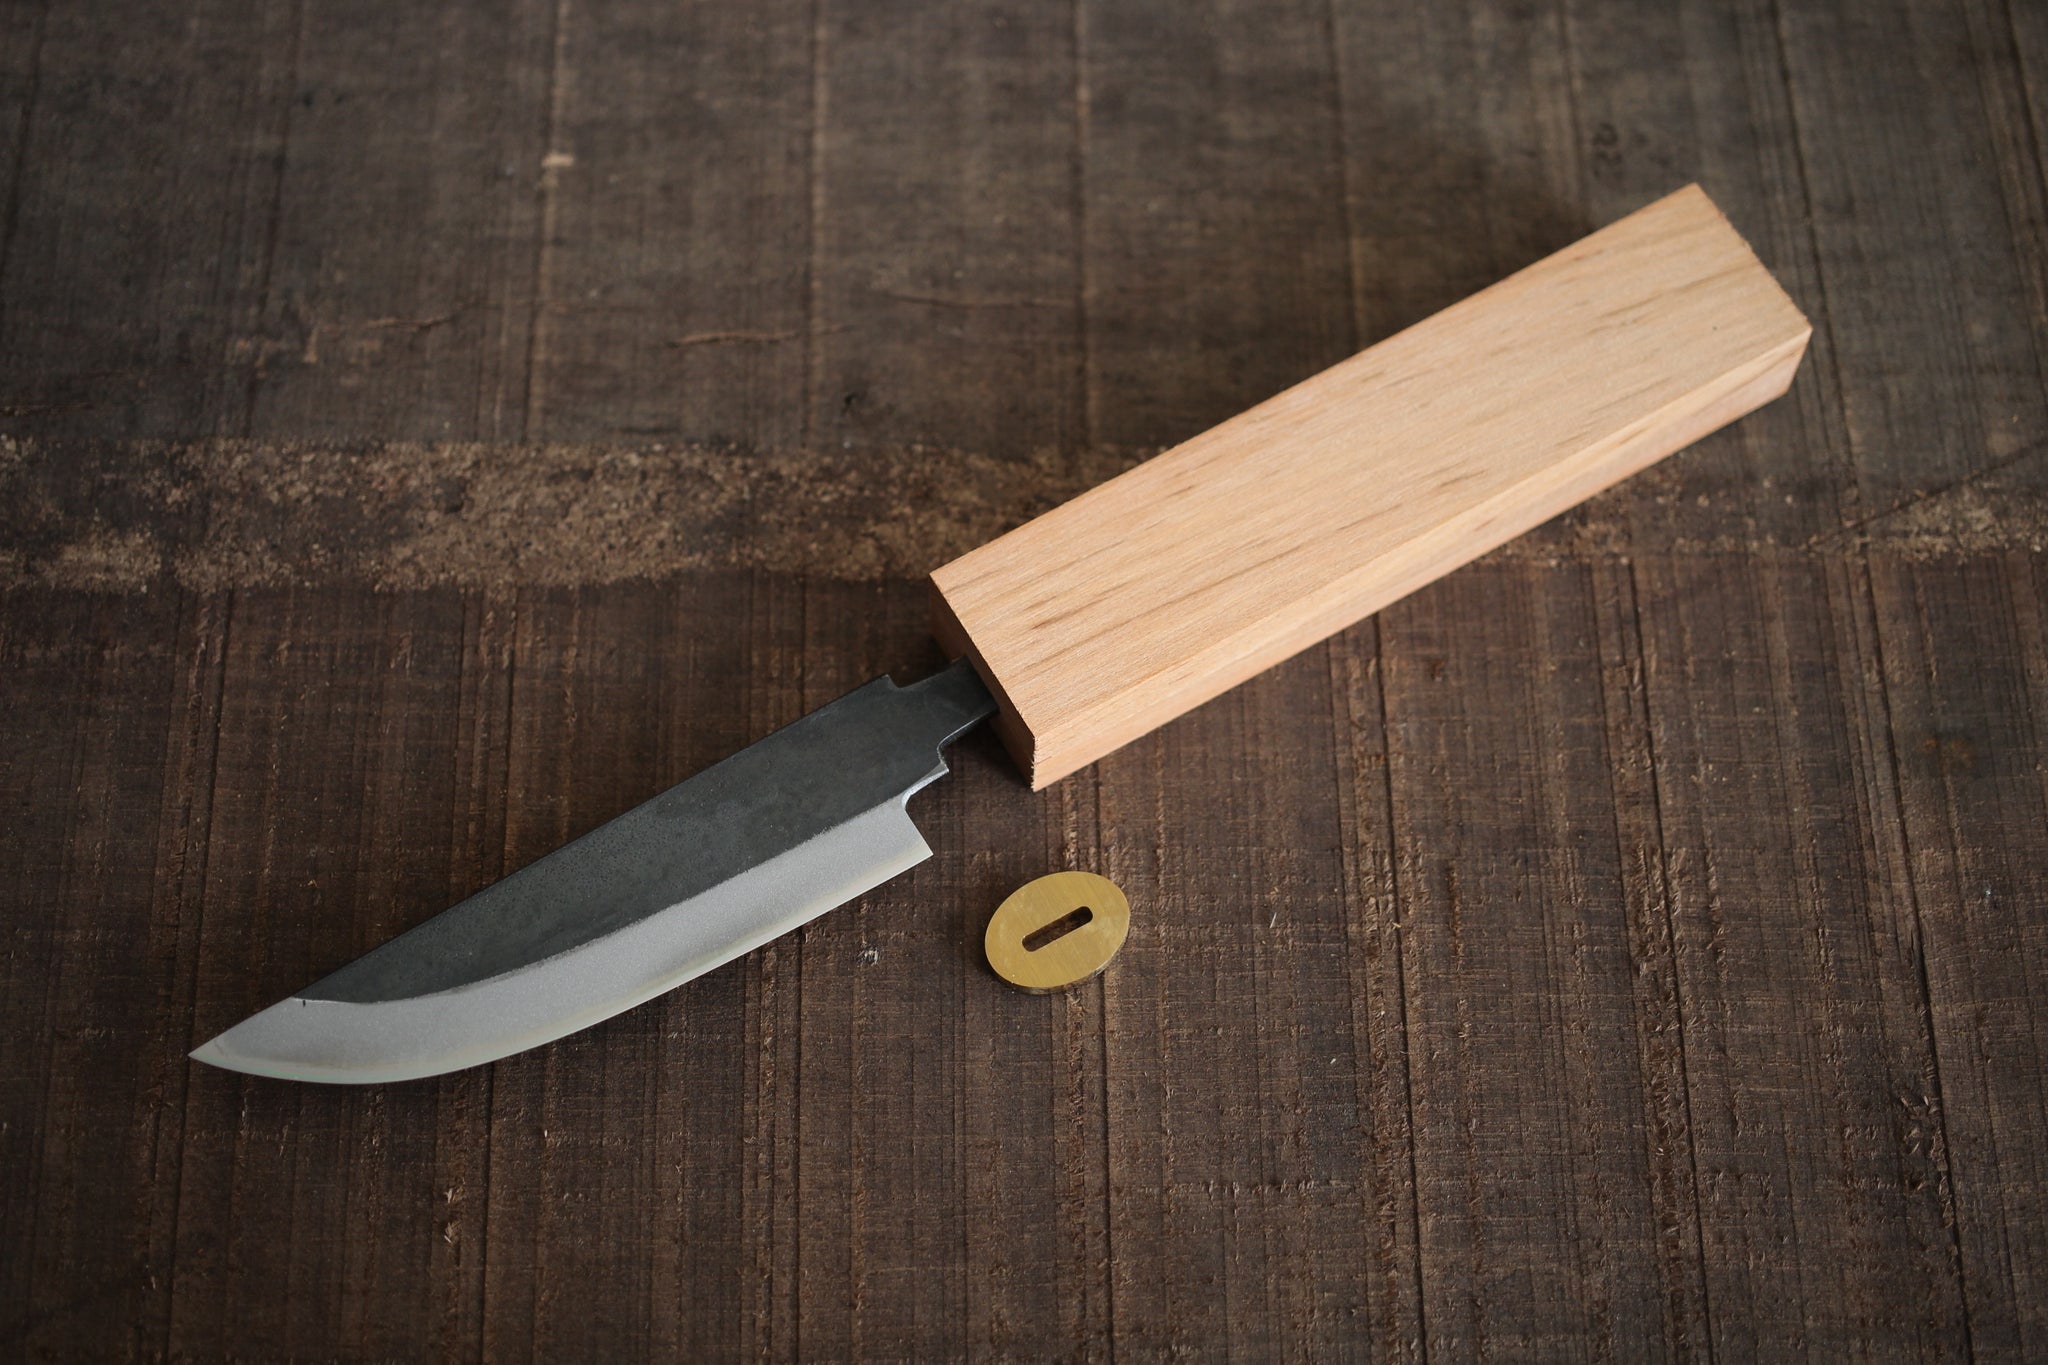 Build a Knife From The Latest Knife Kits